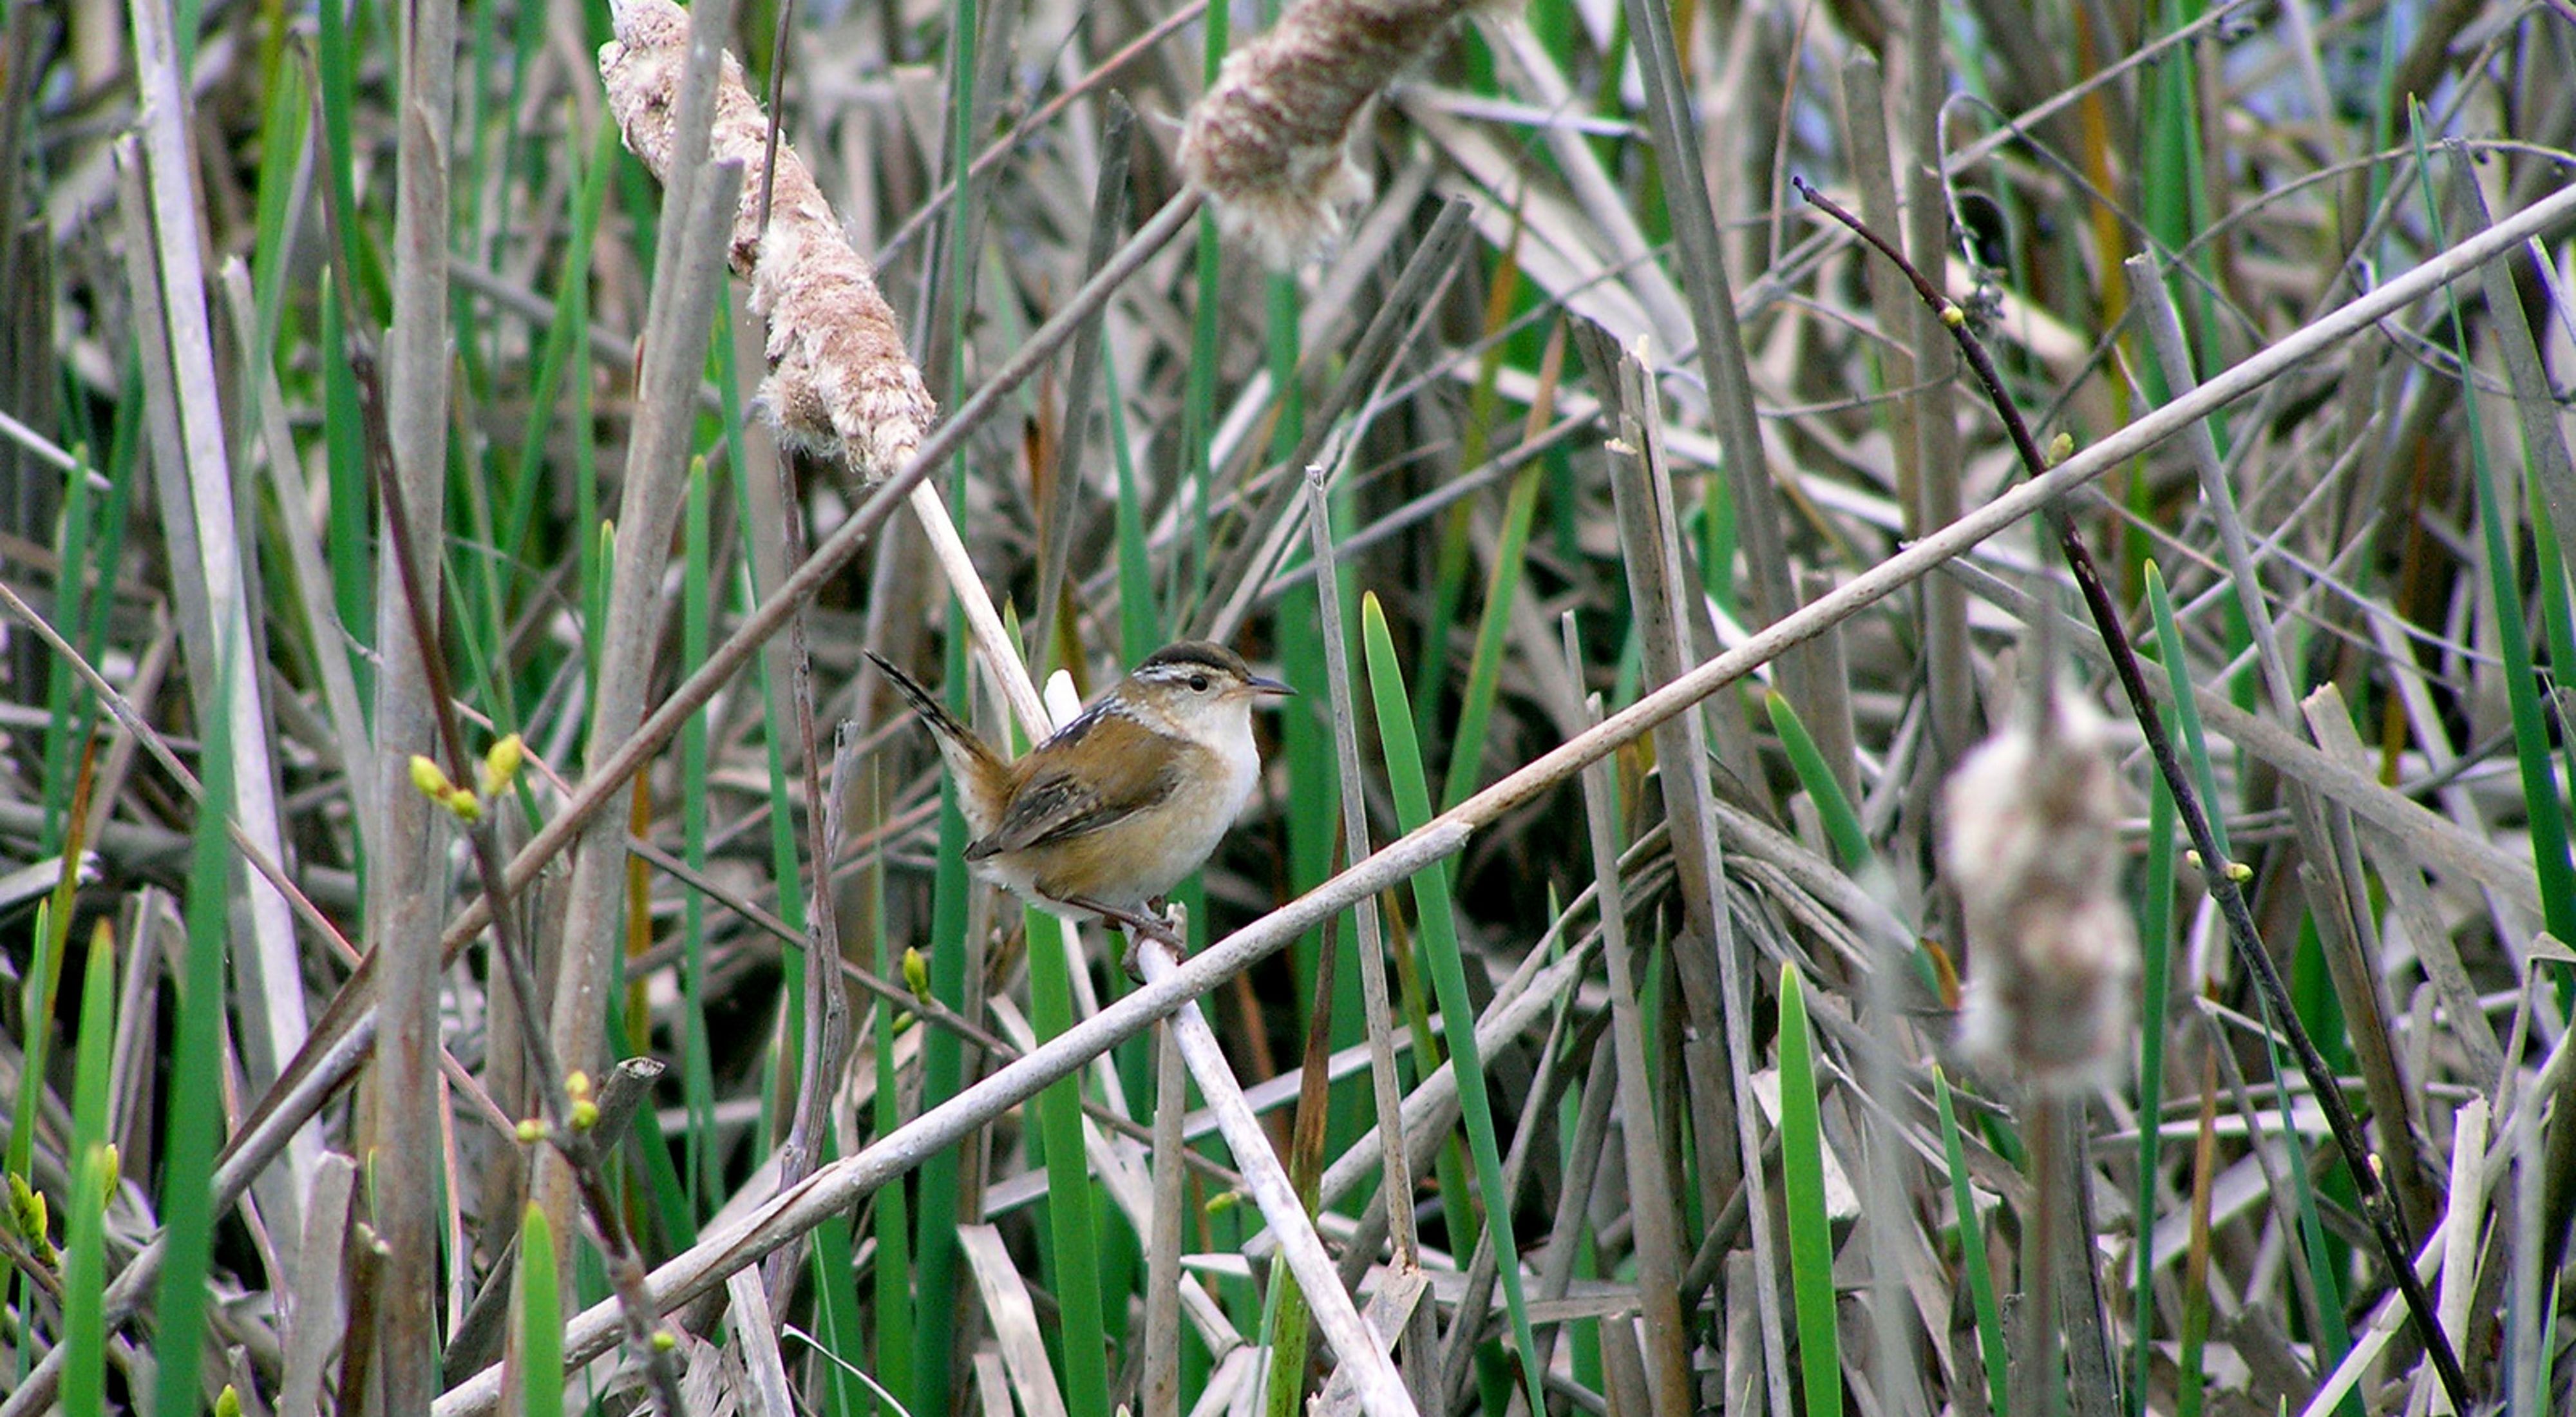 A close up of a marsh wren amongst grasses and reeds.